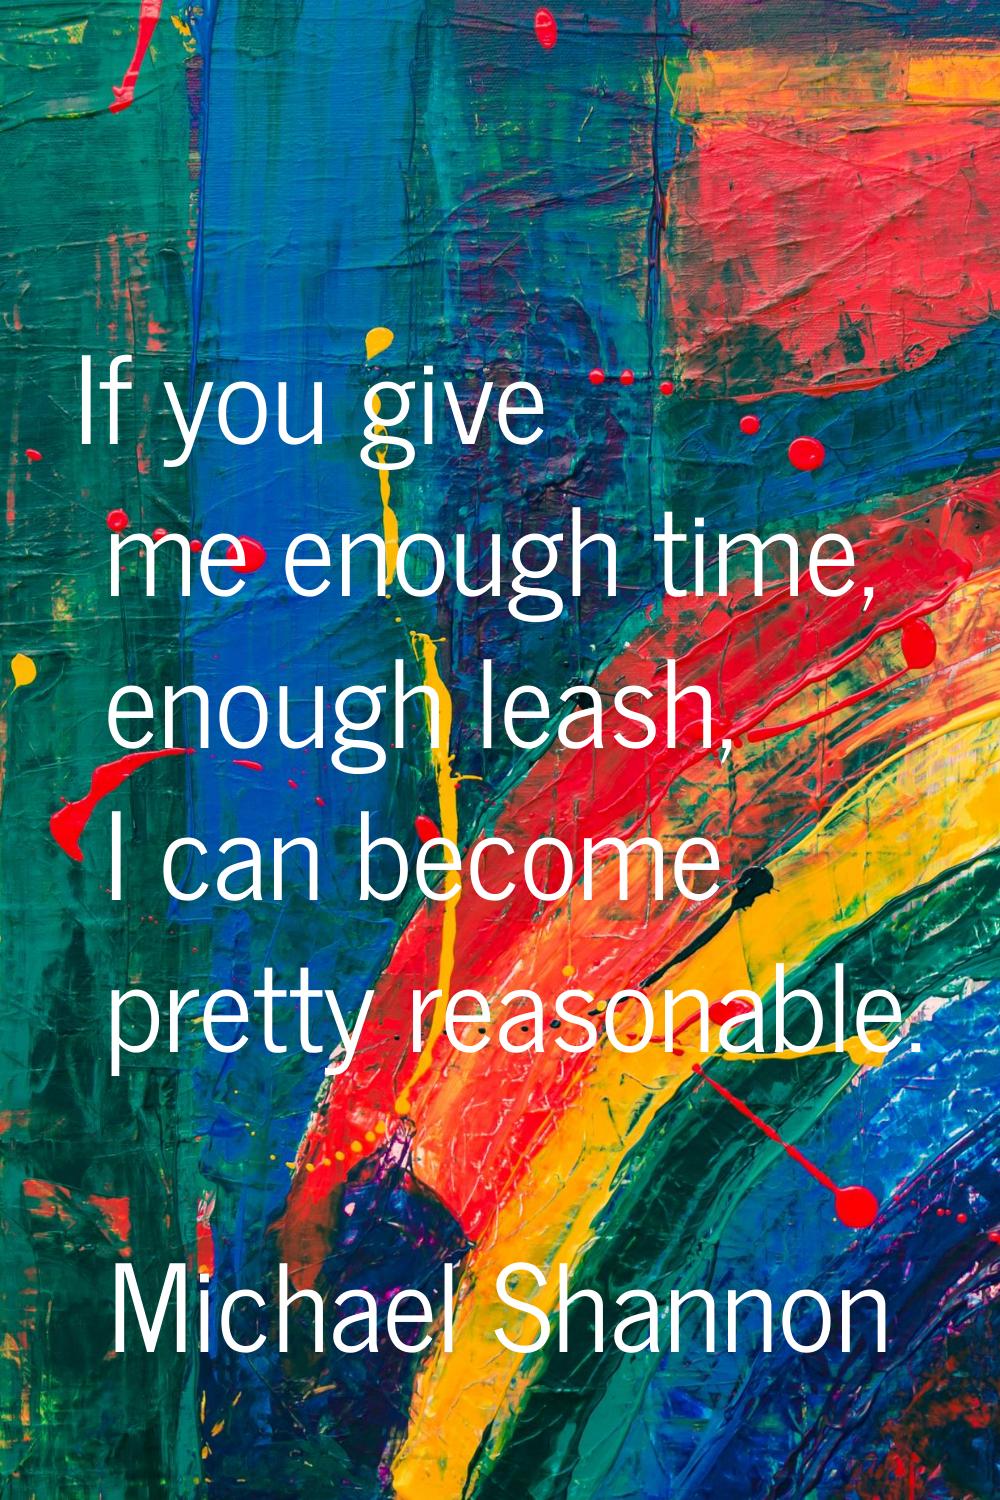 If you give me enough time, enough leash, I can become pretty reasonable.